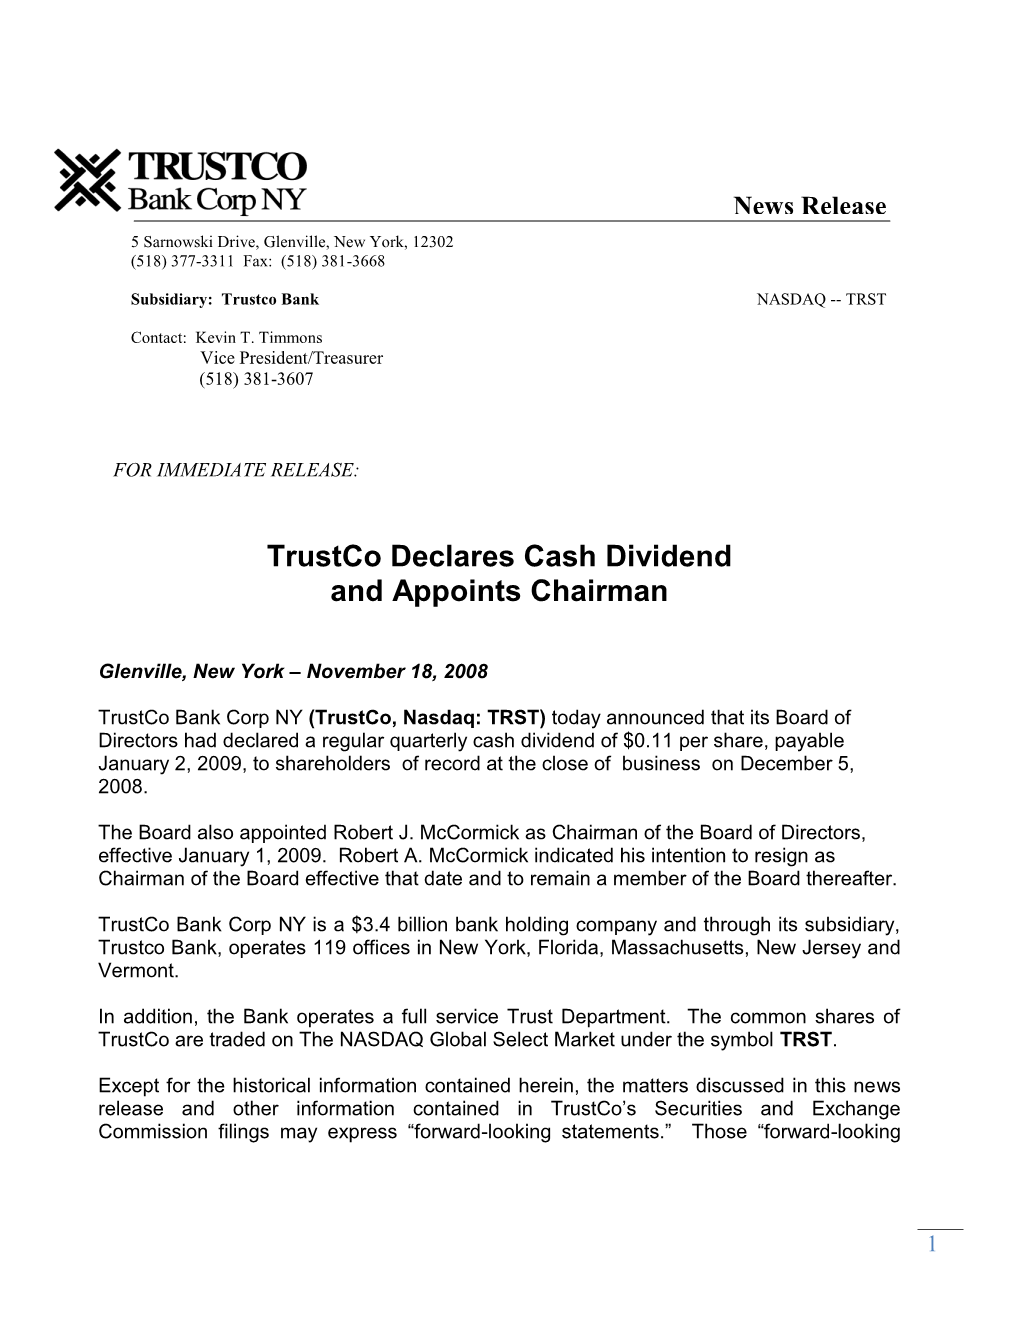 Trustco Declares Cash Dividend and Appoints Chairman